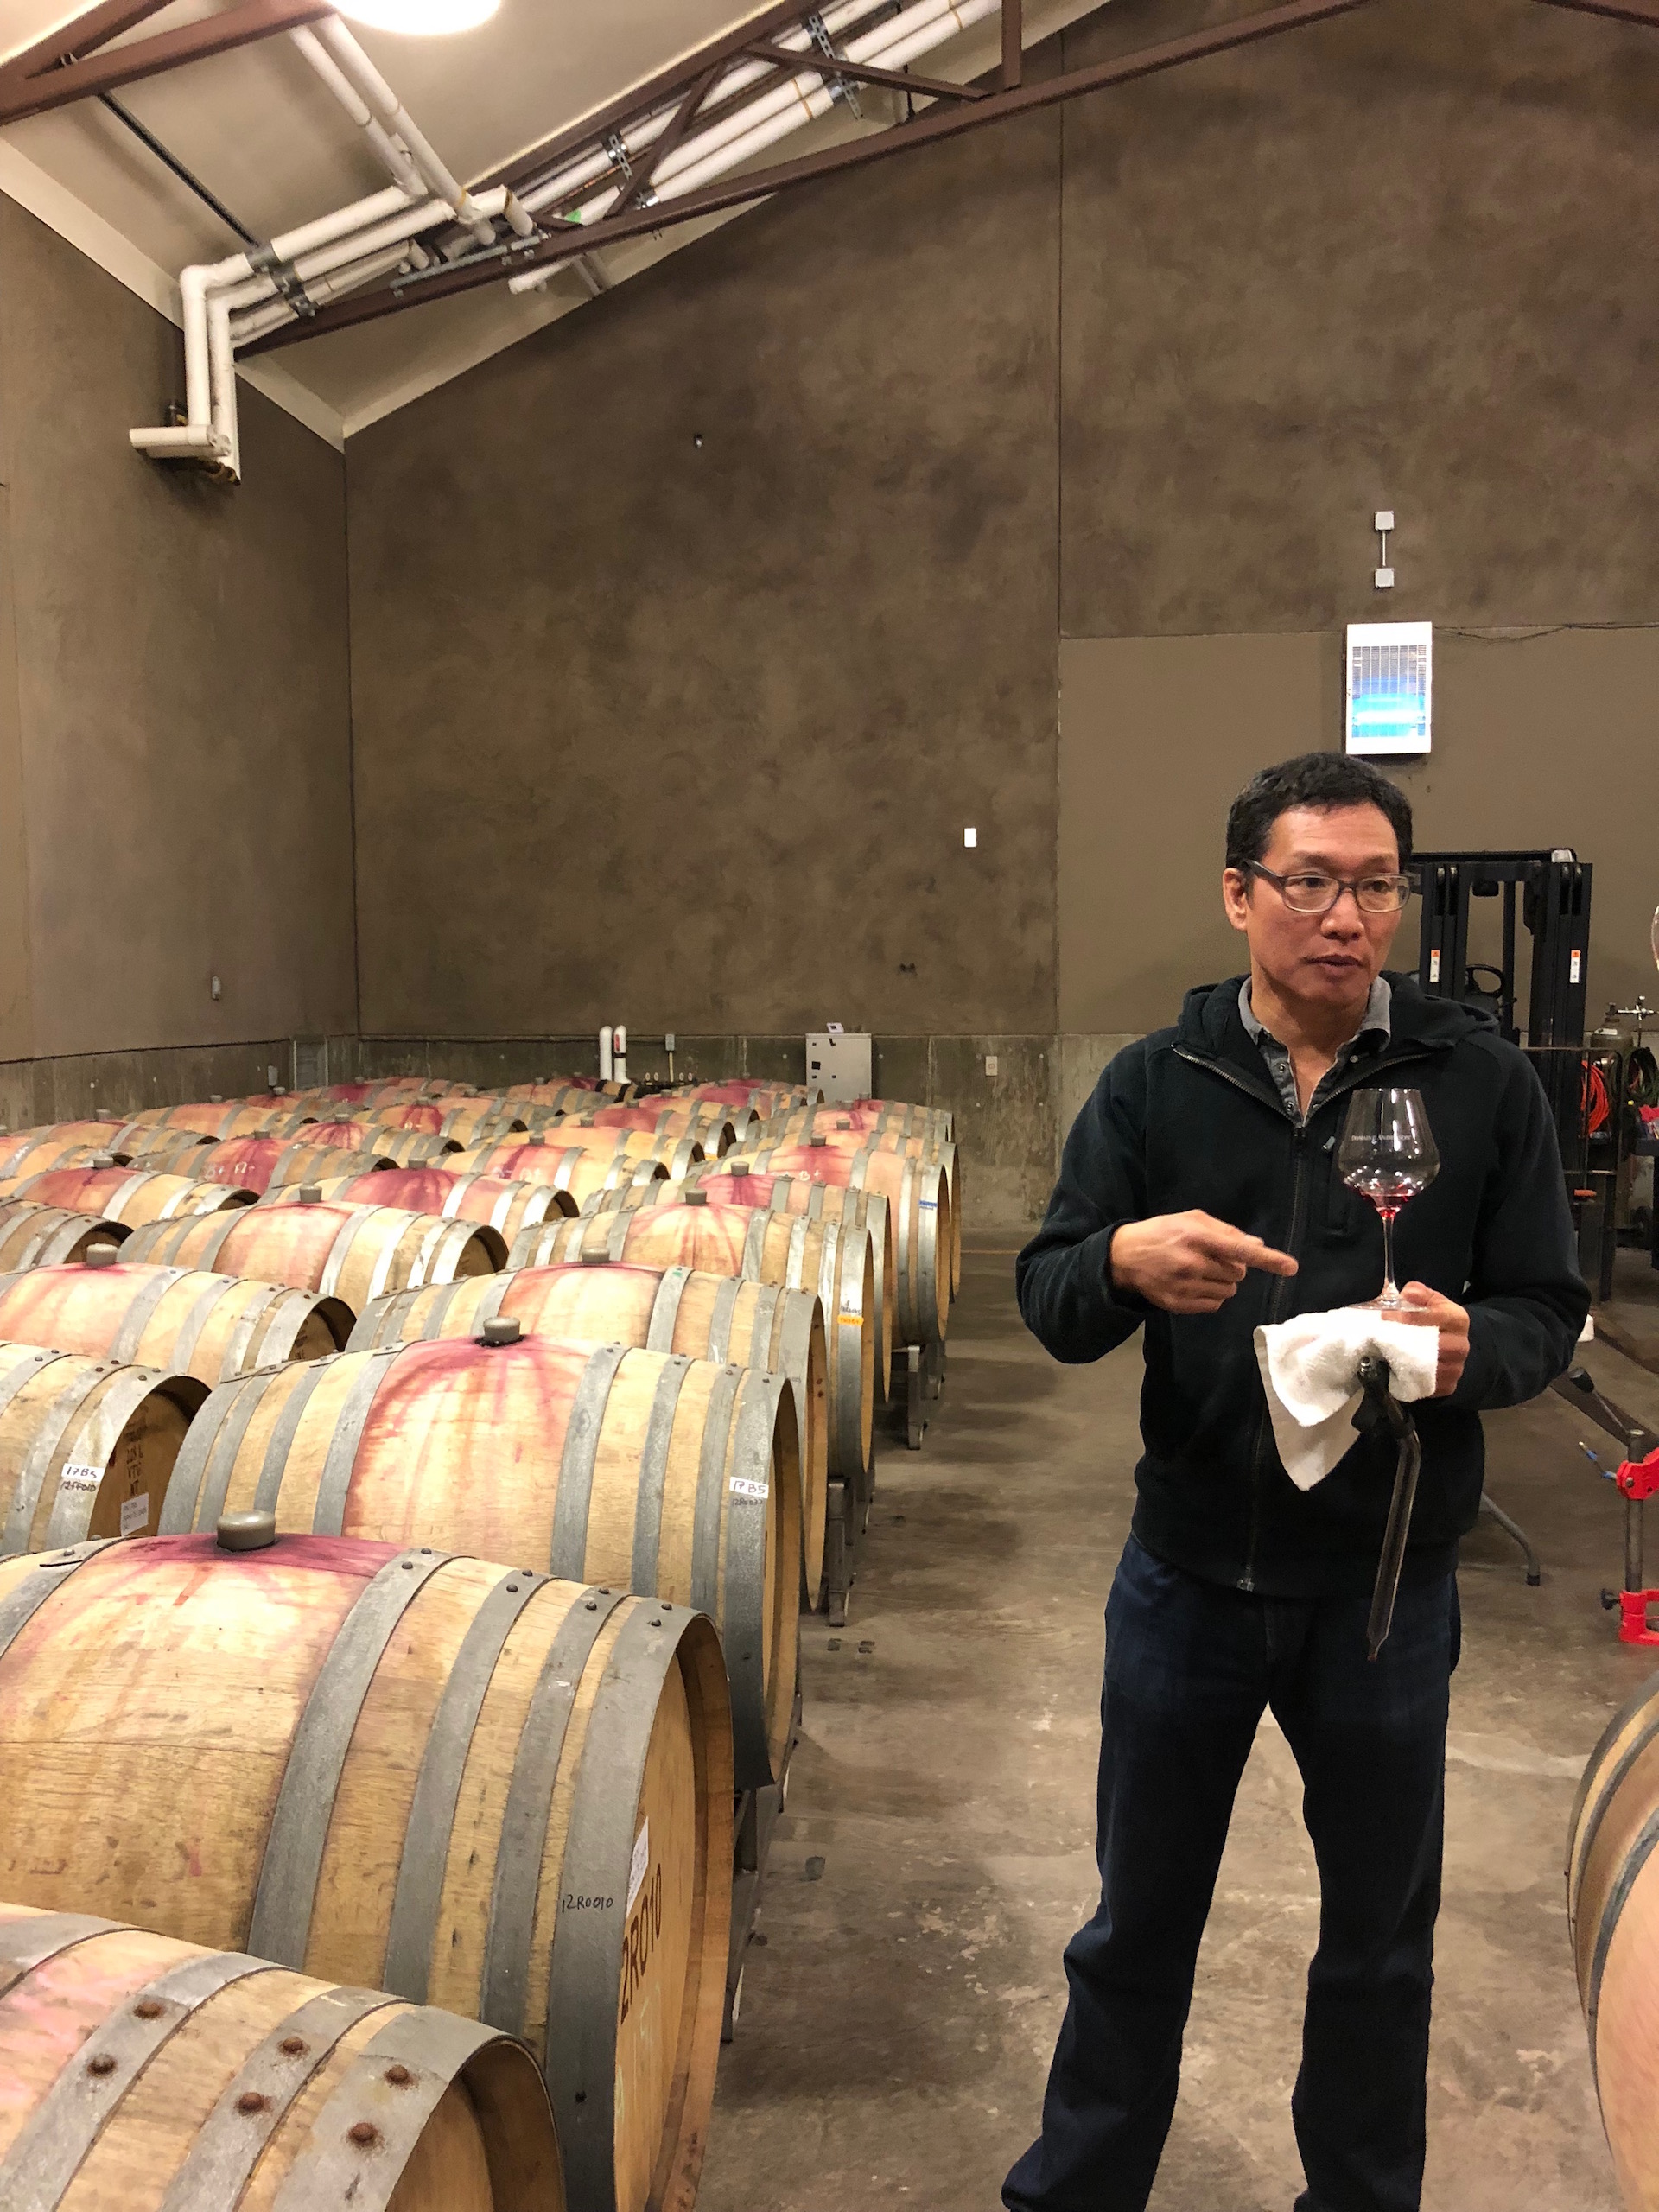 Domaine Anderson winemaker Darrin Low discusses the latest vintage